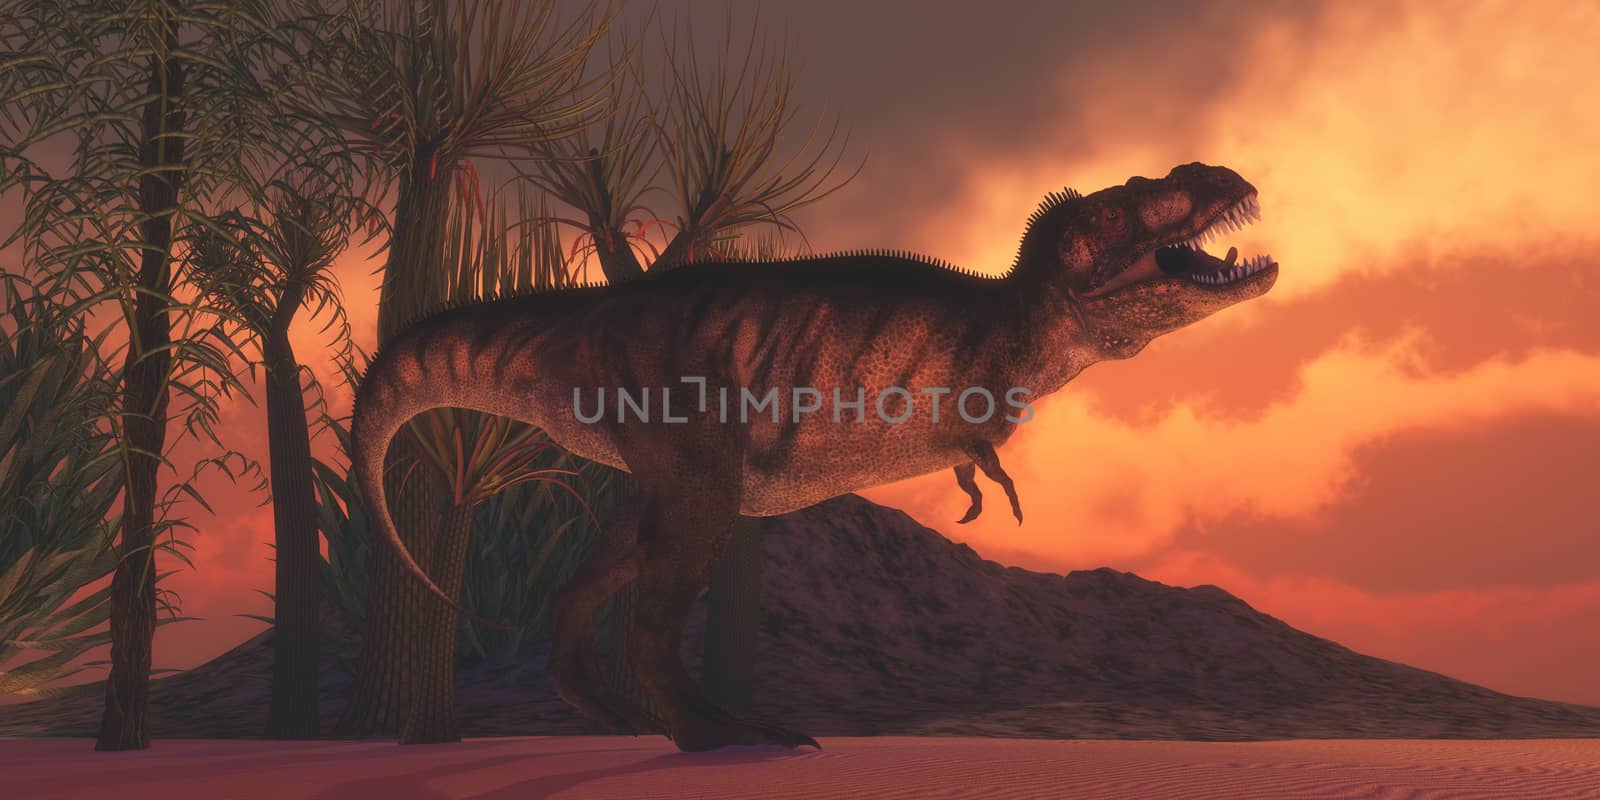 A Tyrannosaurus Rex dinosaur roars to claim his territory as the sun sets on a Cretaceous day in North America. 